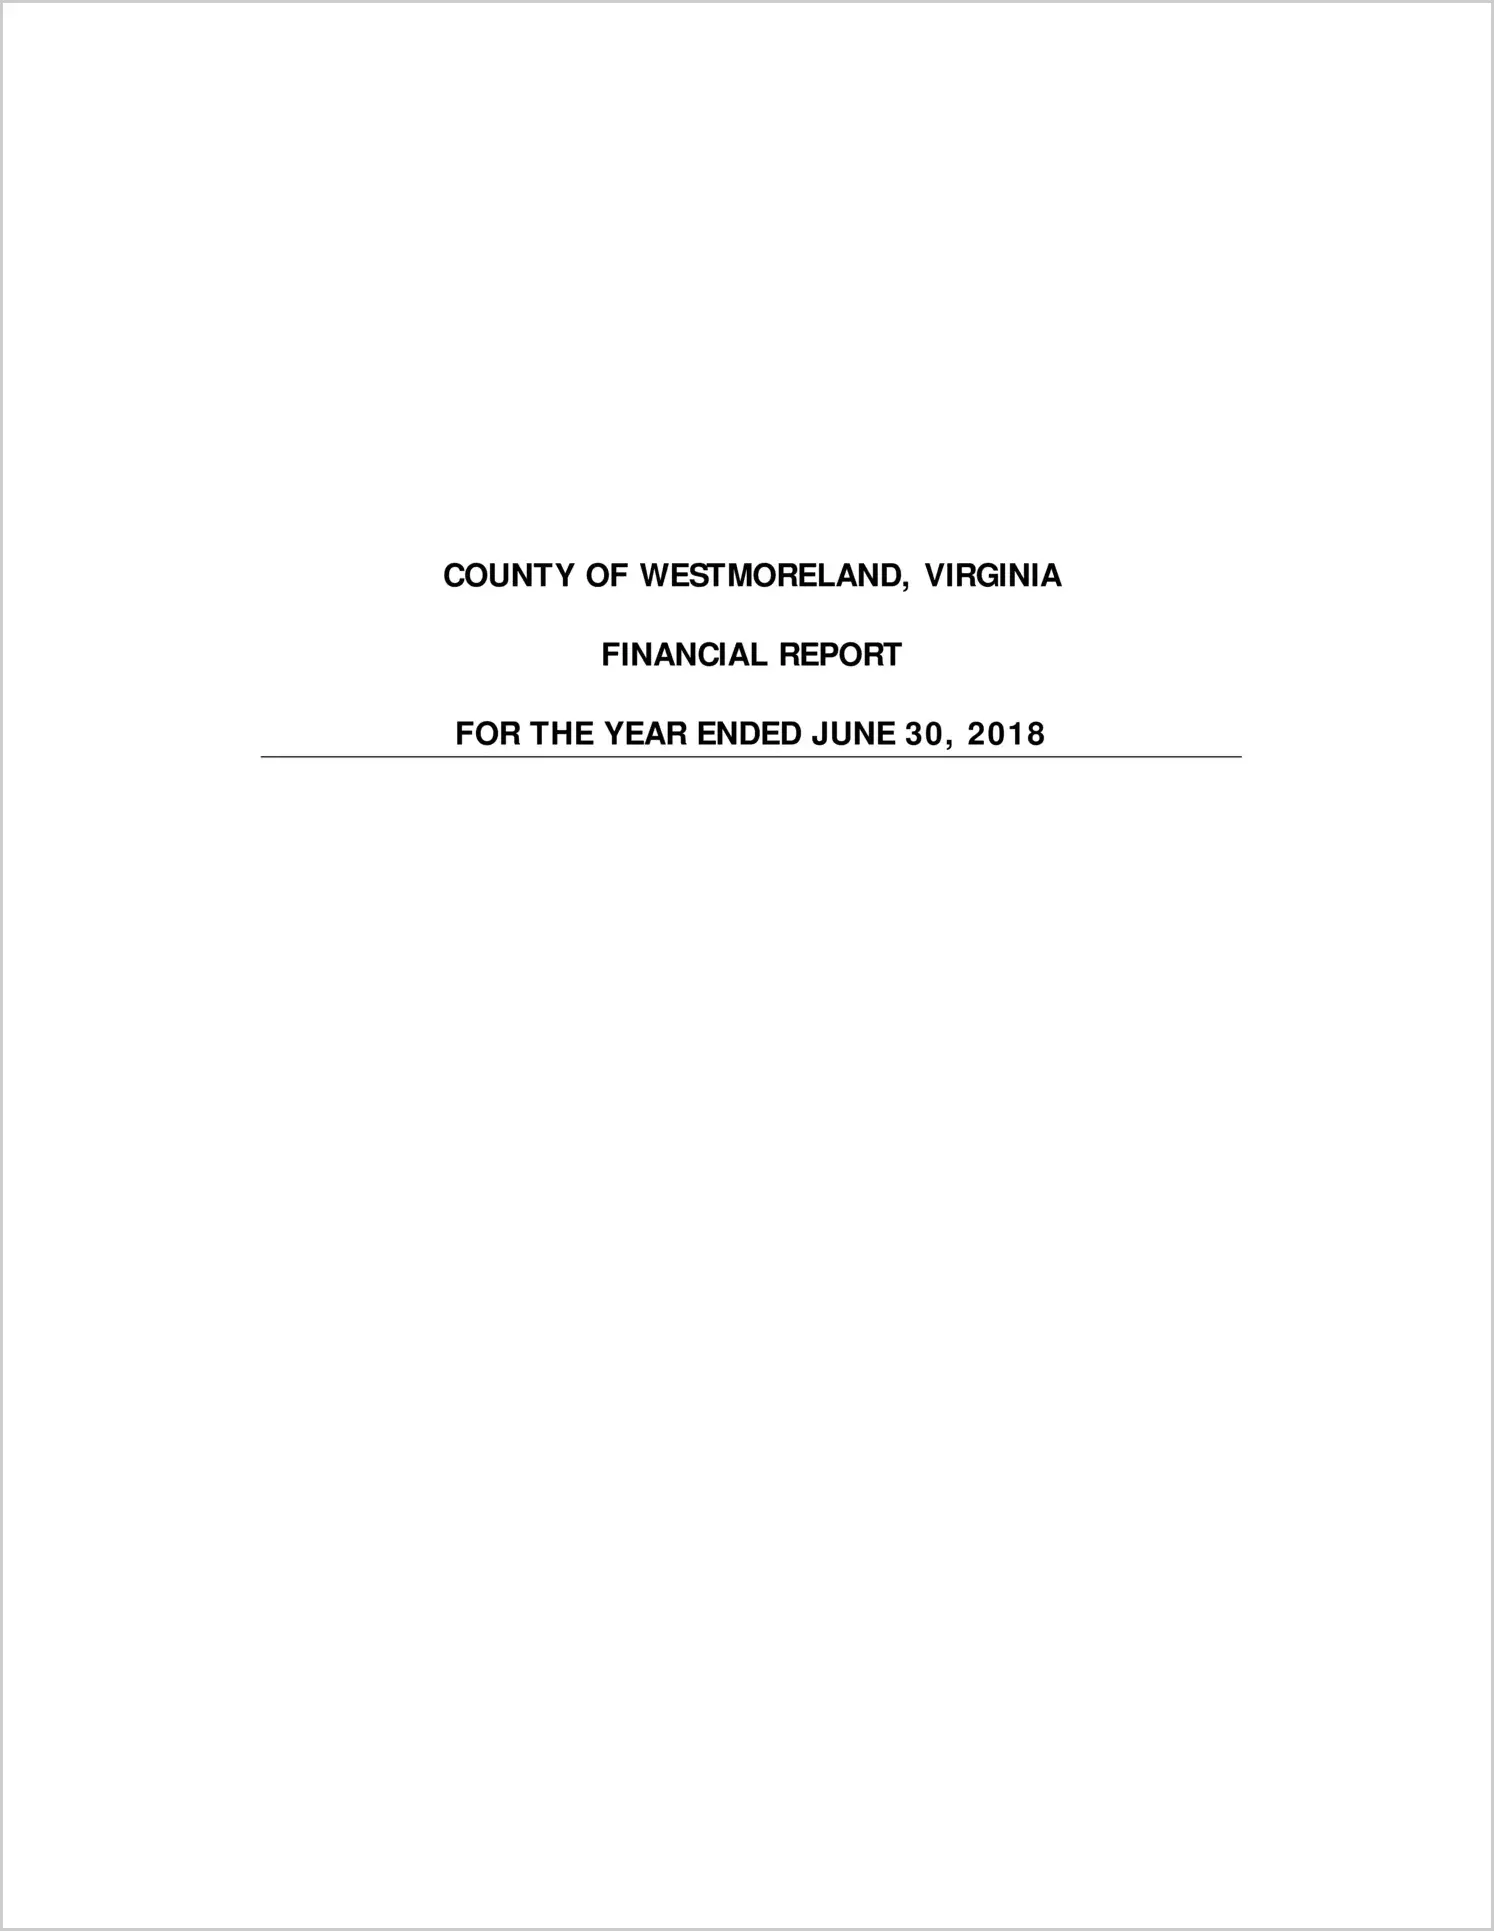 2018 Annual Financial Report for County of Westmoreland